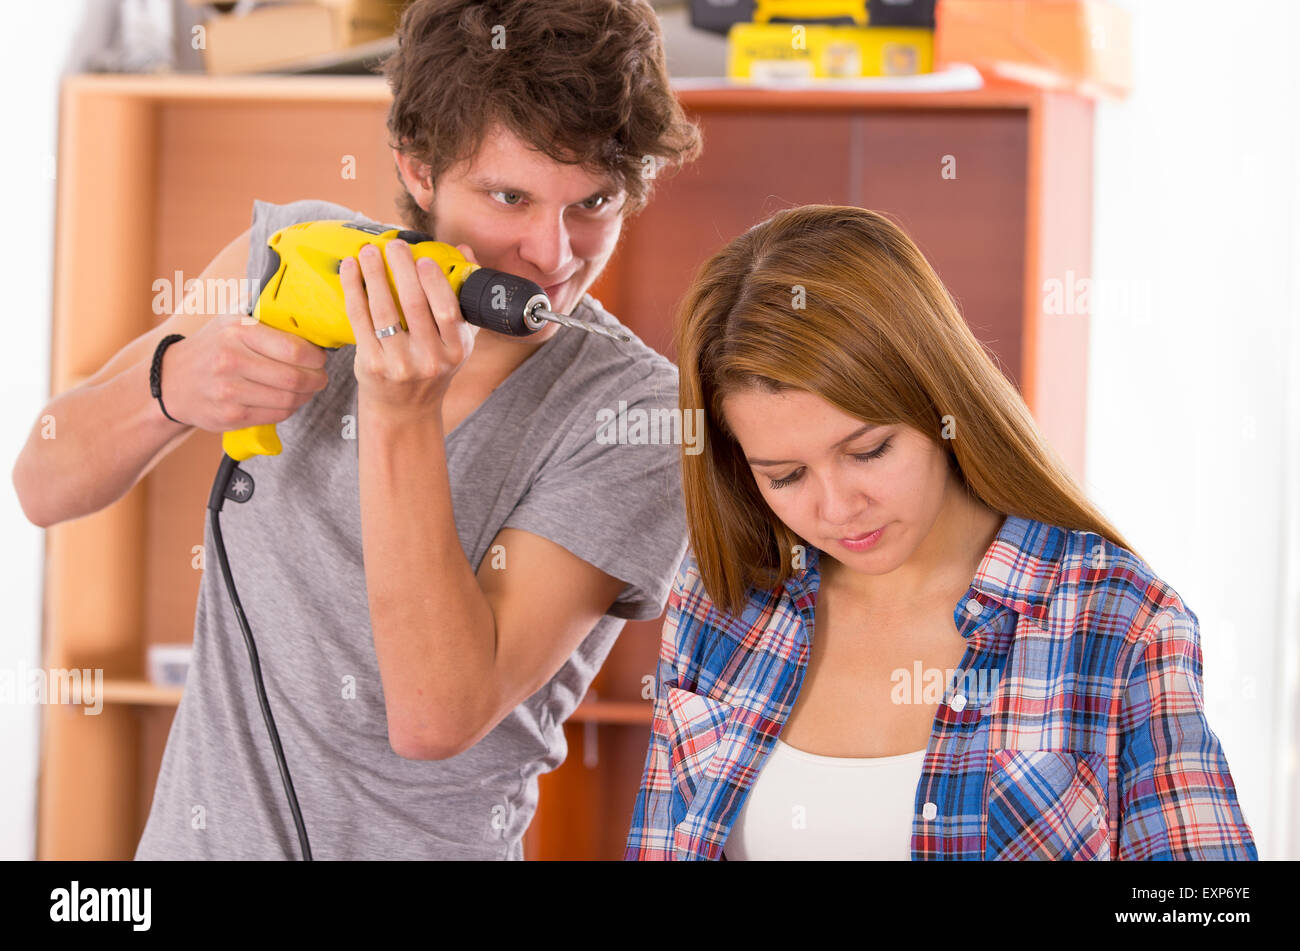 Couple in renovation process standing together with woman looking down and man holding up power drill next to her head Stock Photo